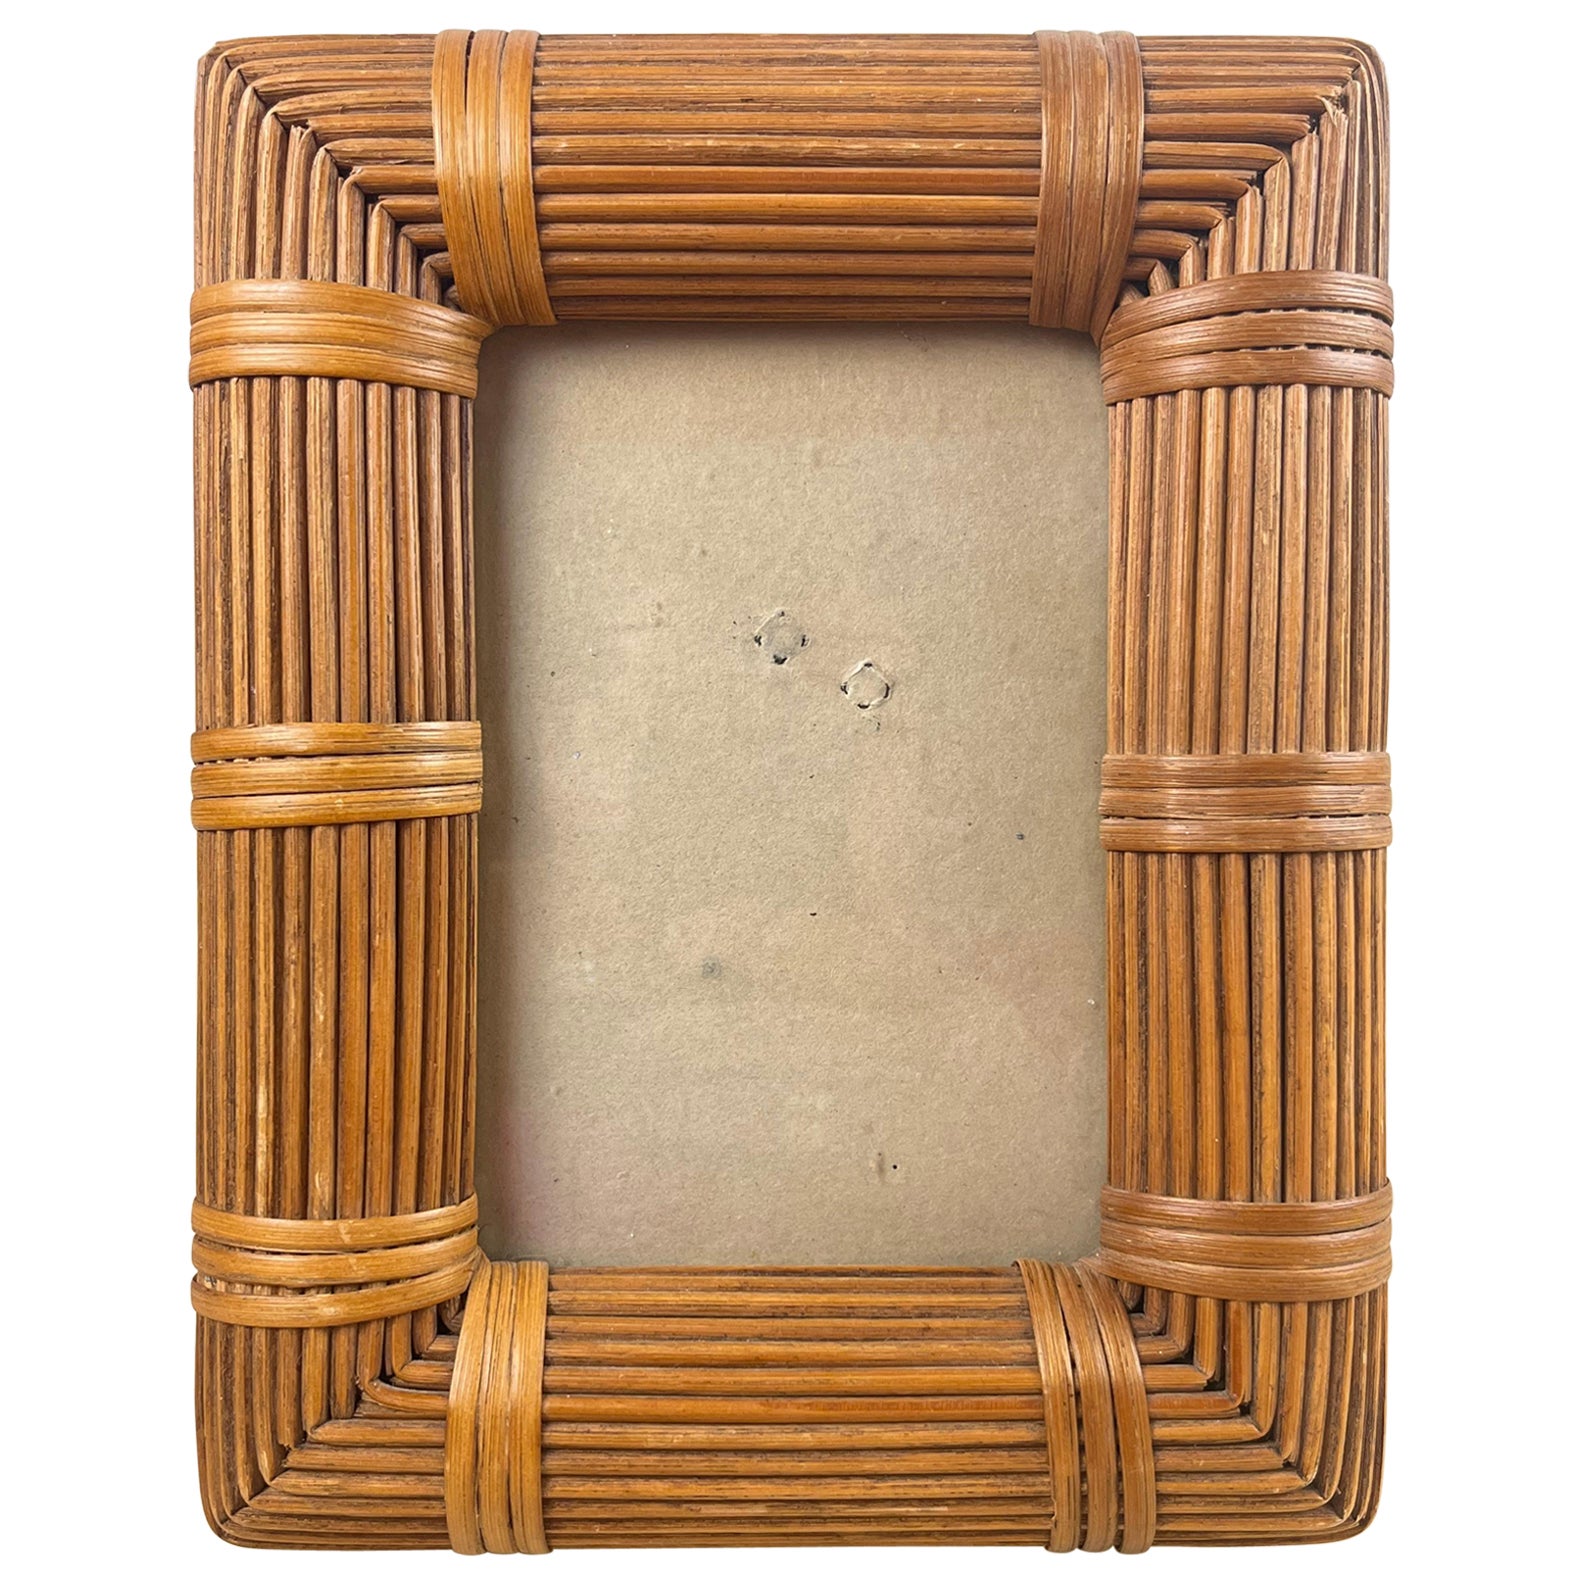 Rattan photo frame, Italy, 1970s
It belonged to my grandparents and is intact. Small signs of aging. Good conditions.
The external measurement is 19cm wide x 25cm high. The internal measurements are 10cm x 15.5cm.